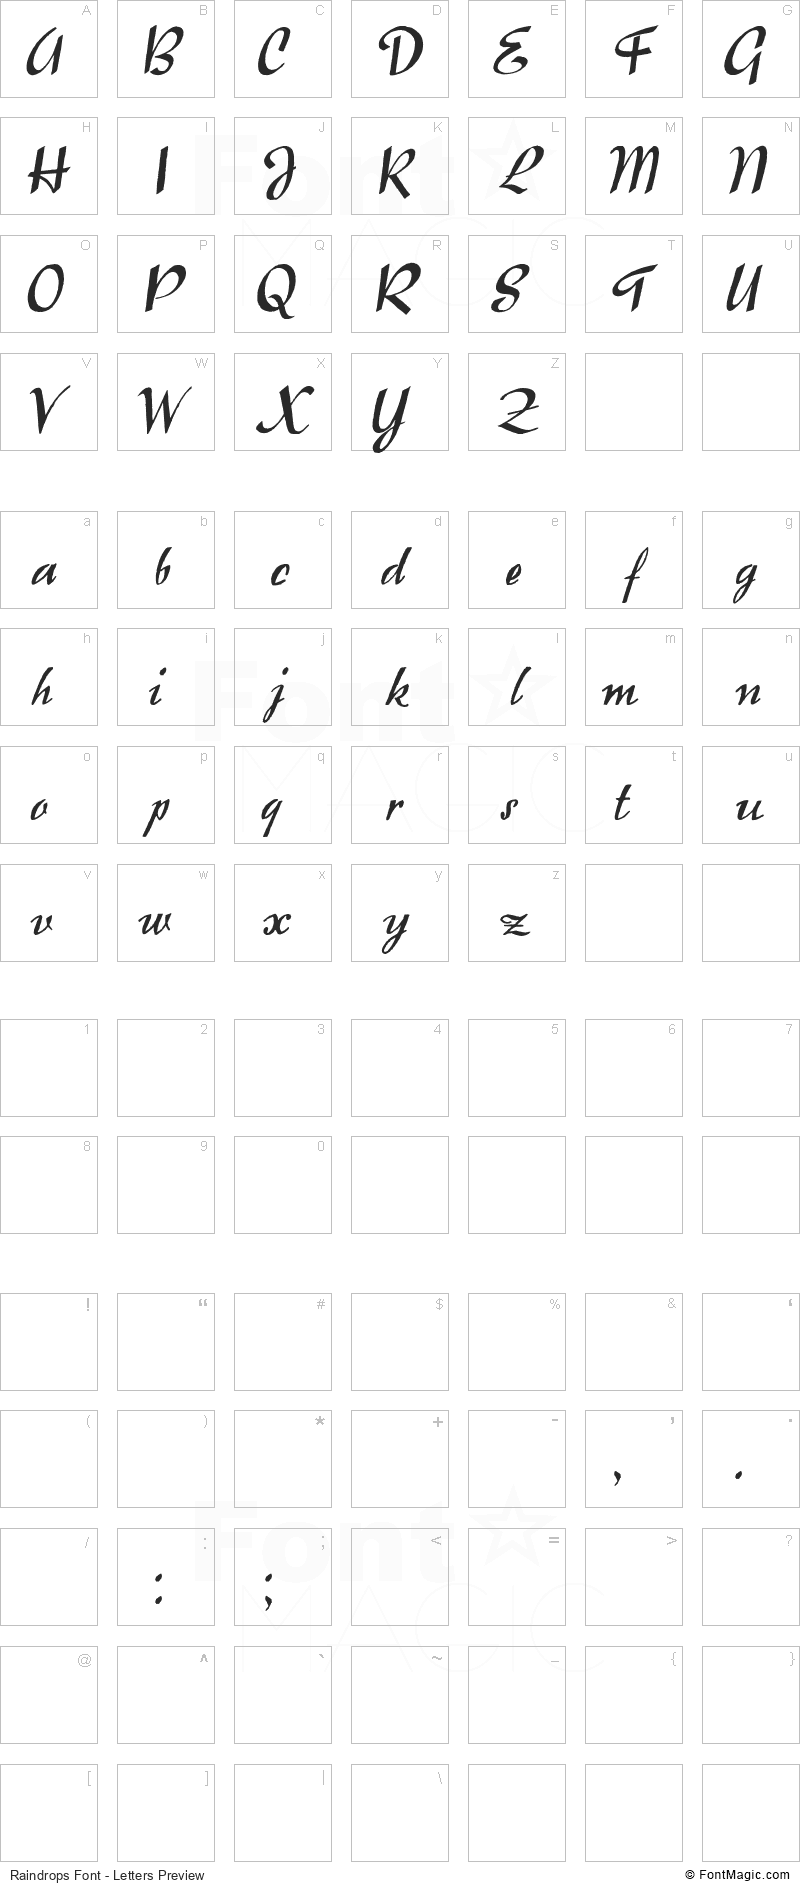 Raindrops Font - All Latters Preview Chart